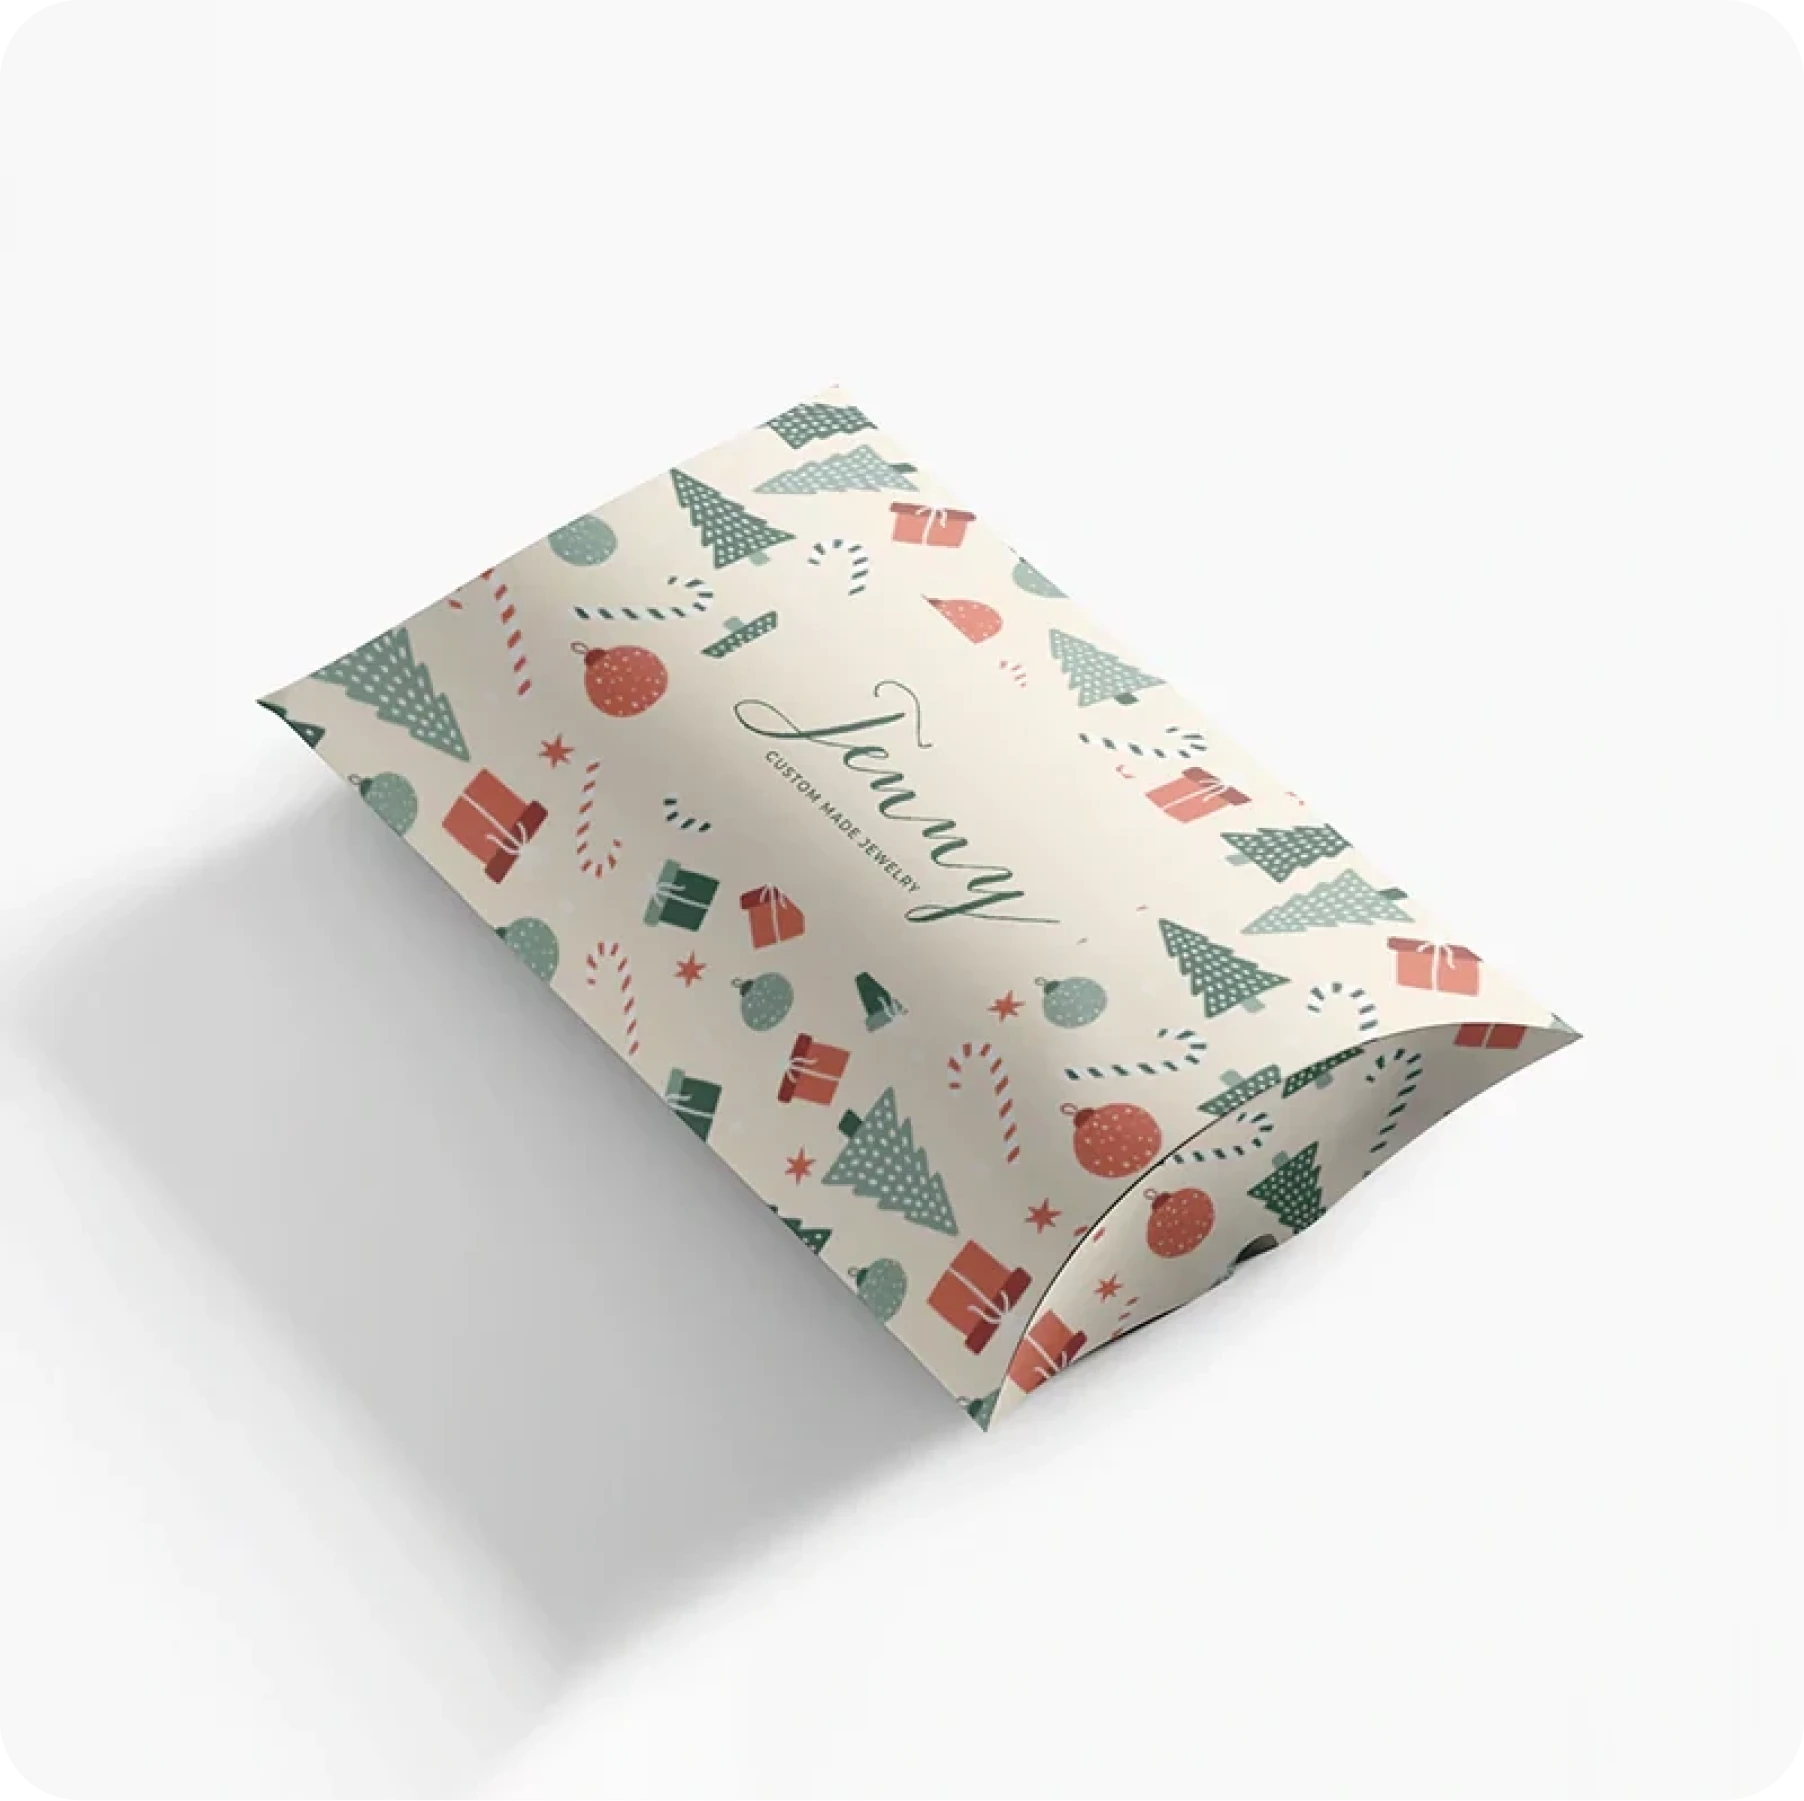 Freshen Up Product Packaging With Custom Printed Pillow Boxes | The Box Lane